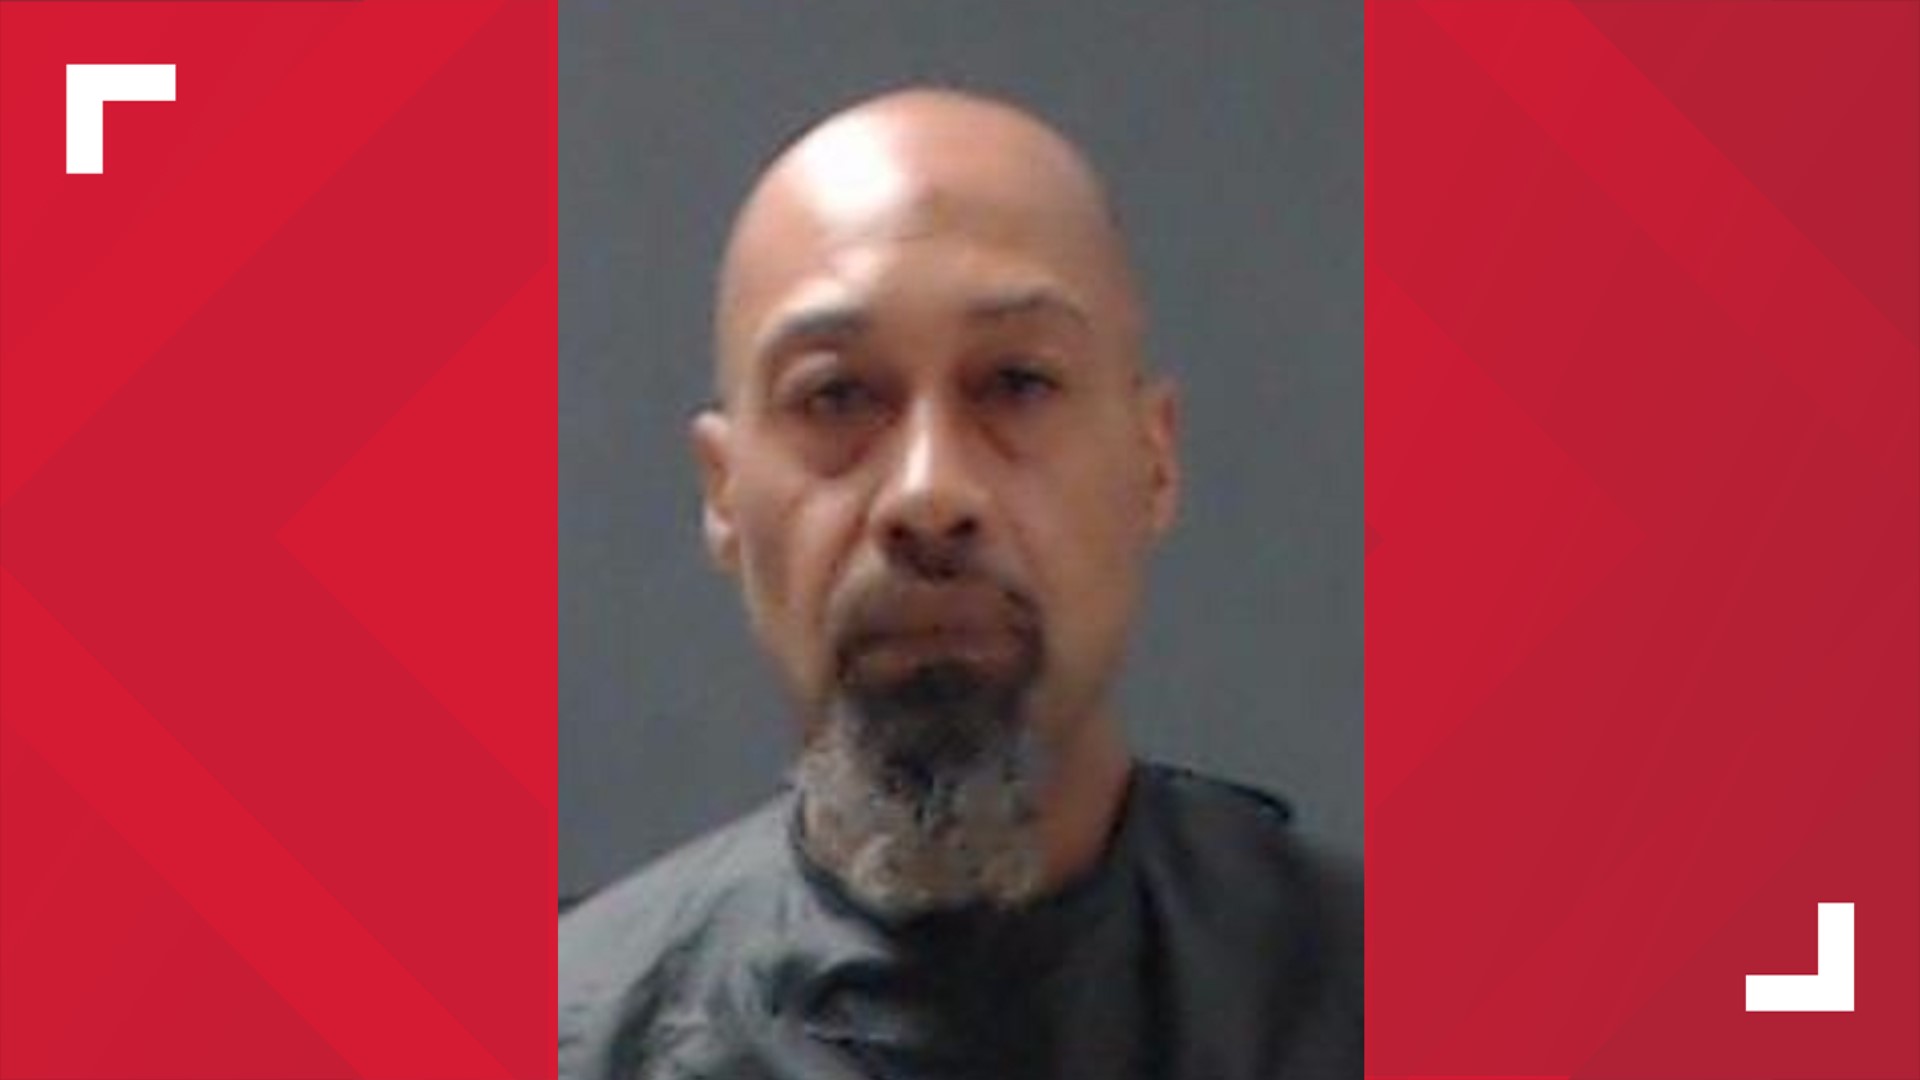 Machir Miller, 49, was charged in Greenville, Texas on a warrant for murder and wanton endangerment in relation to the homicide.